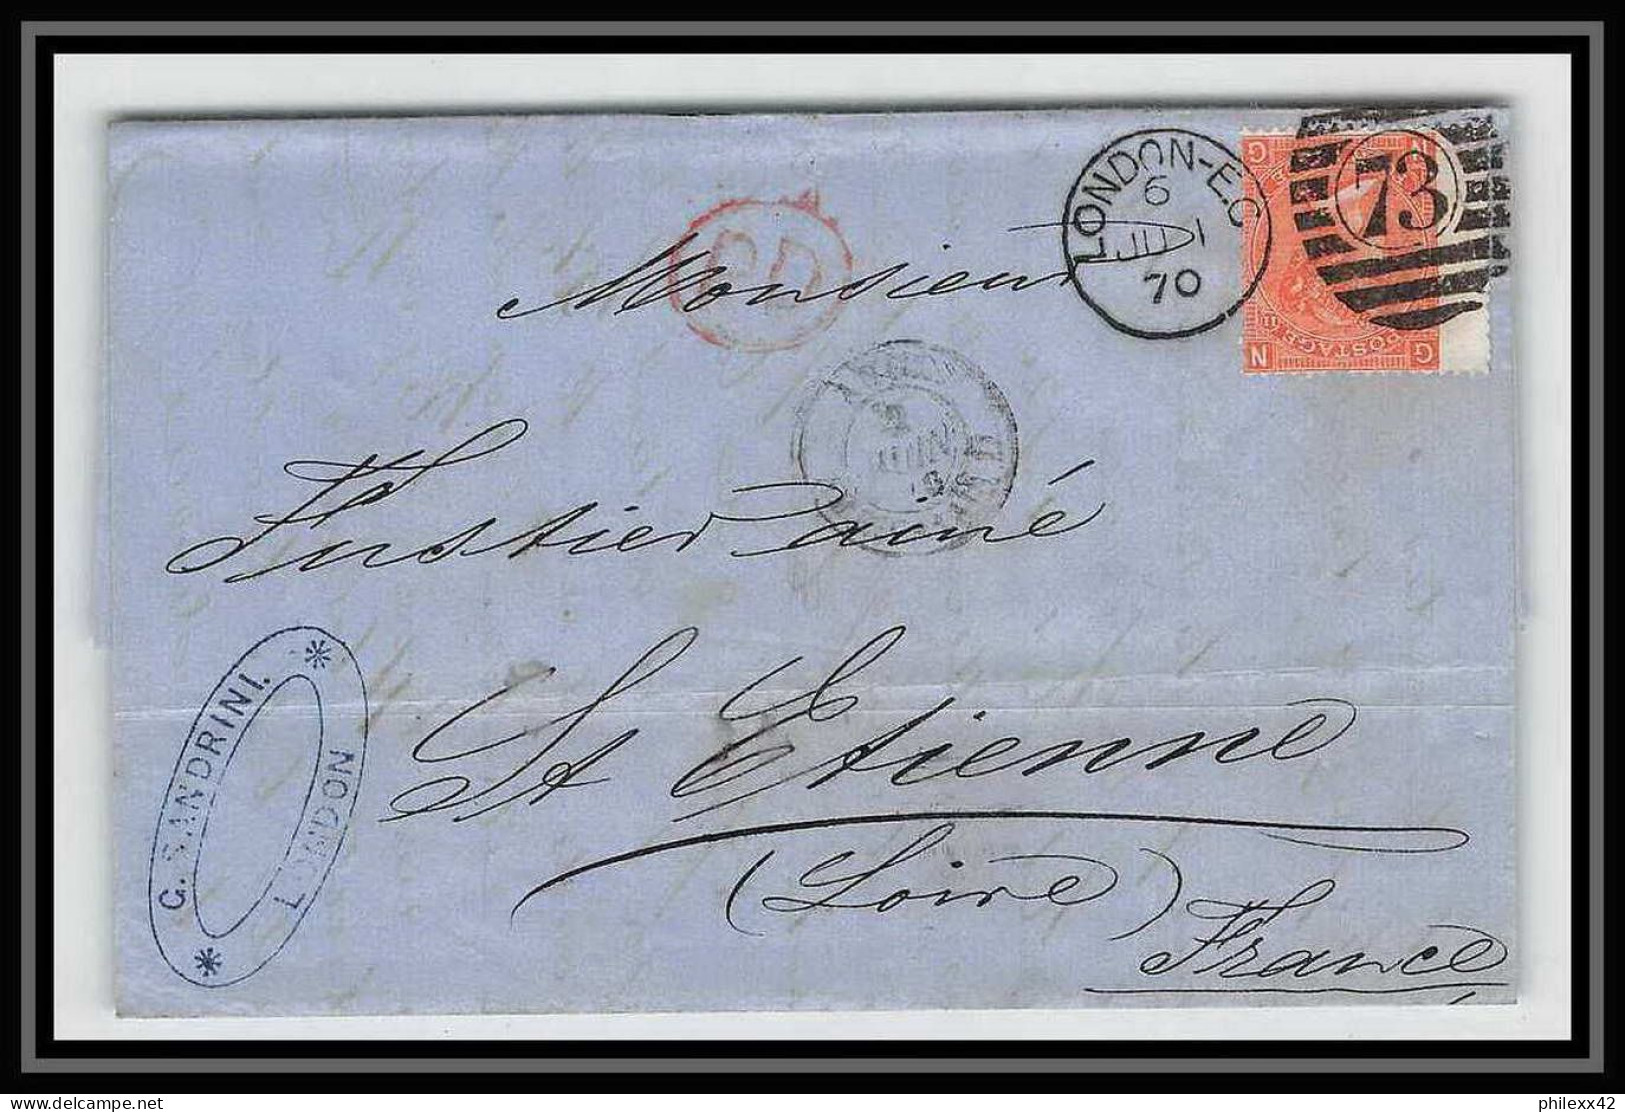 35716 N°32 Victoria 4p Red London St Etienne France 1870 Cachet 73 Lettre Cover Grande Bretagne England - Covers & Documents